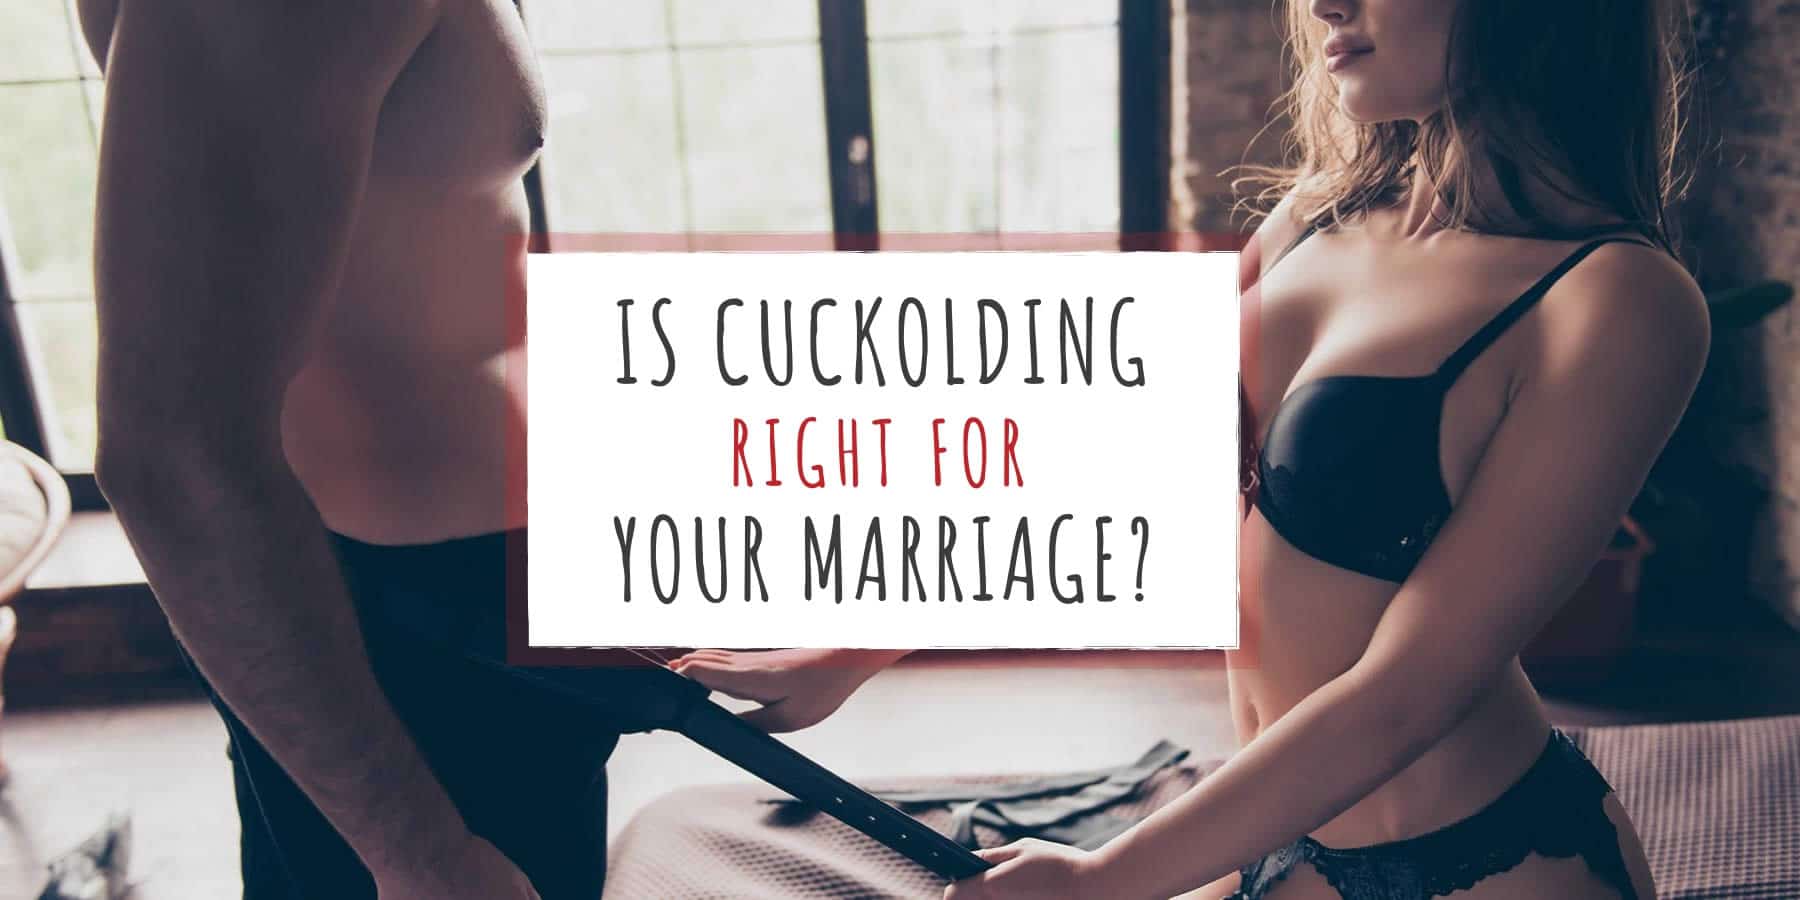 Is Cuckolding Right for Your Marriage?